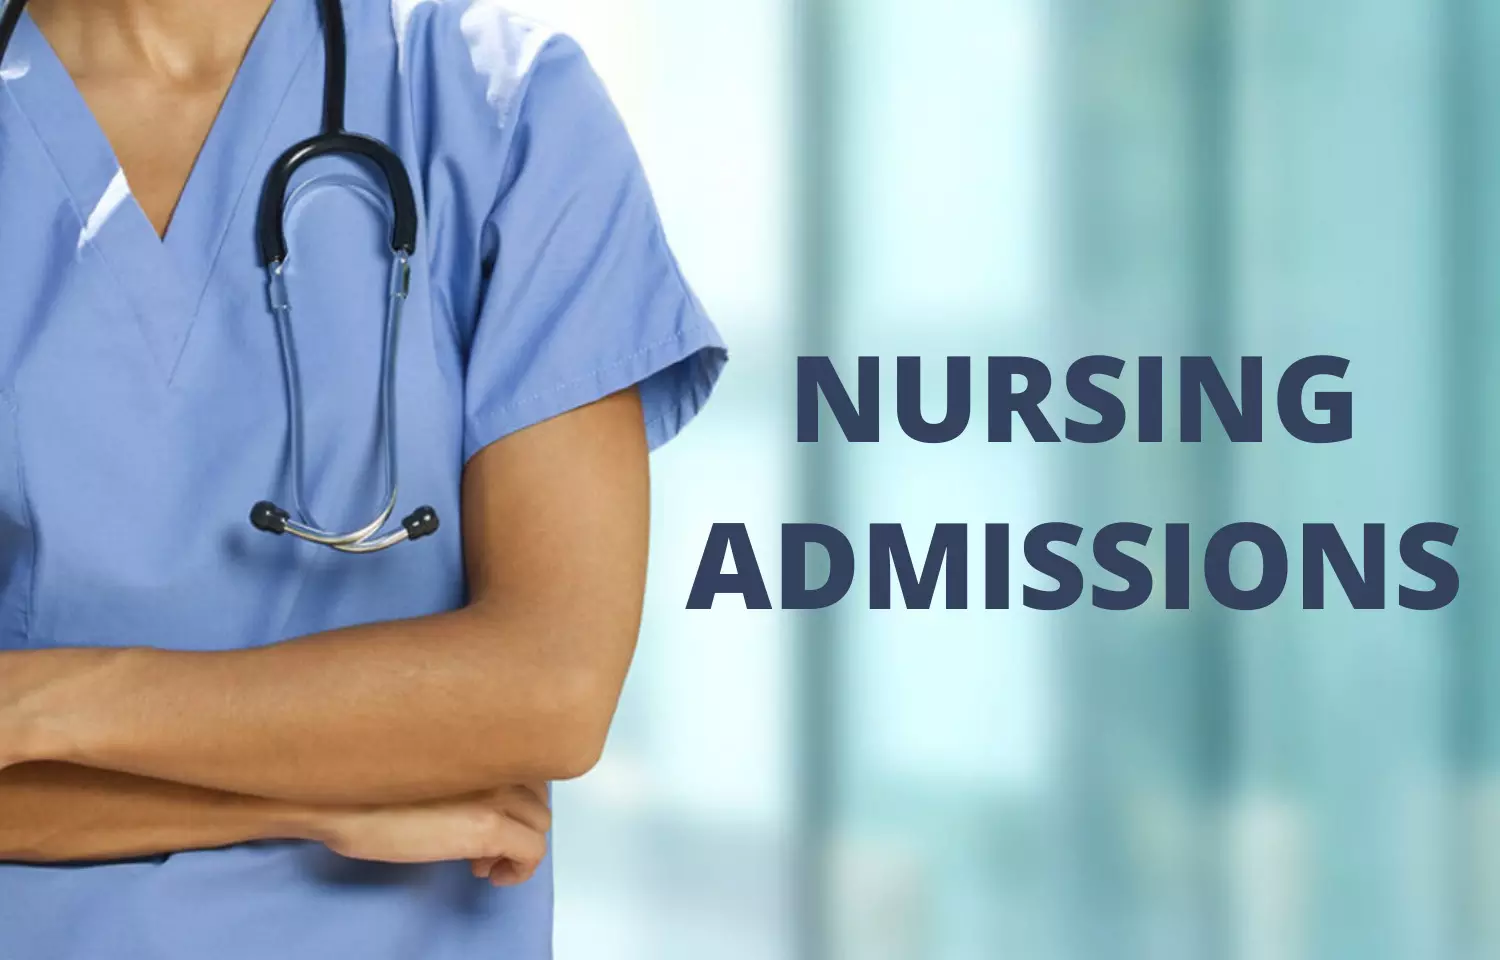 DME Gujarat Releases Counselling Schedule For BSc Nursing admissions 2021